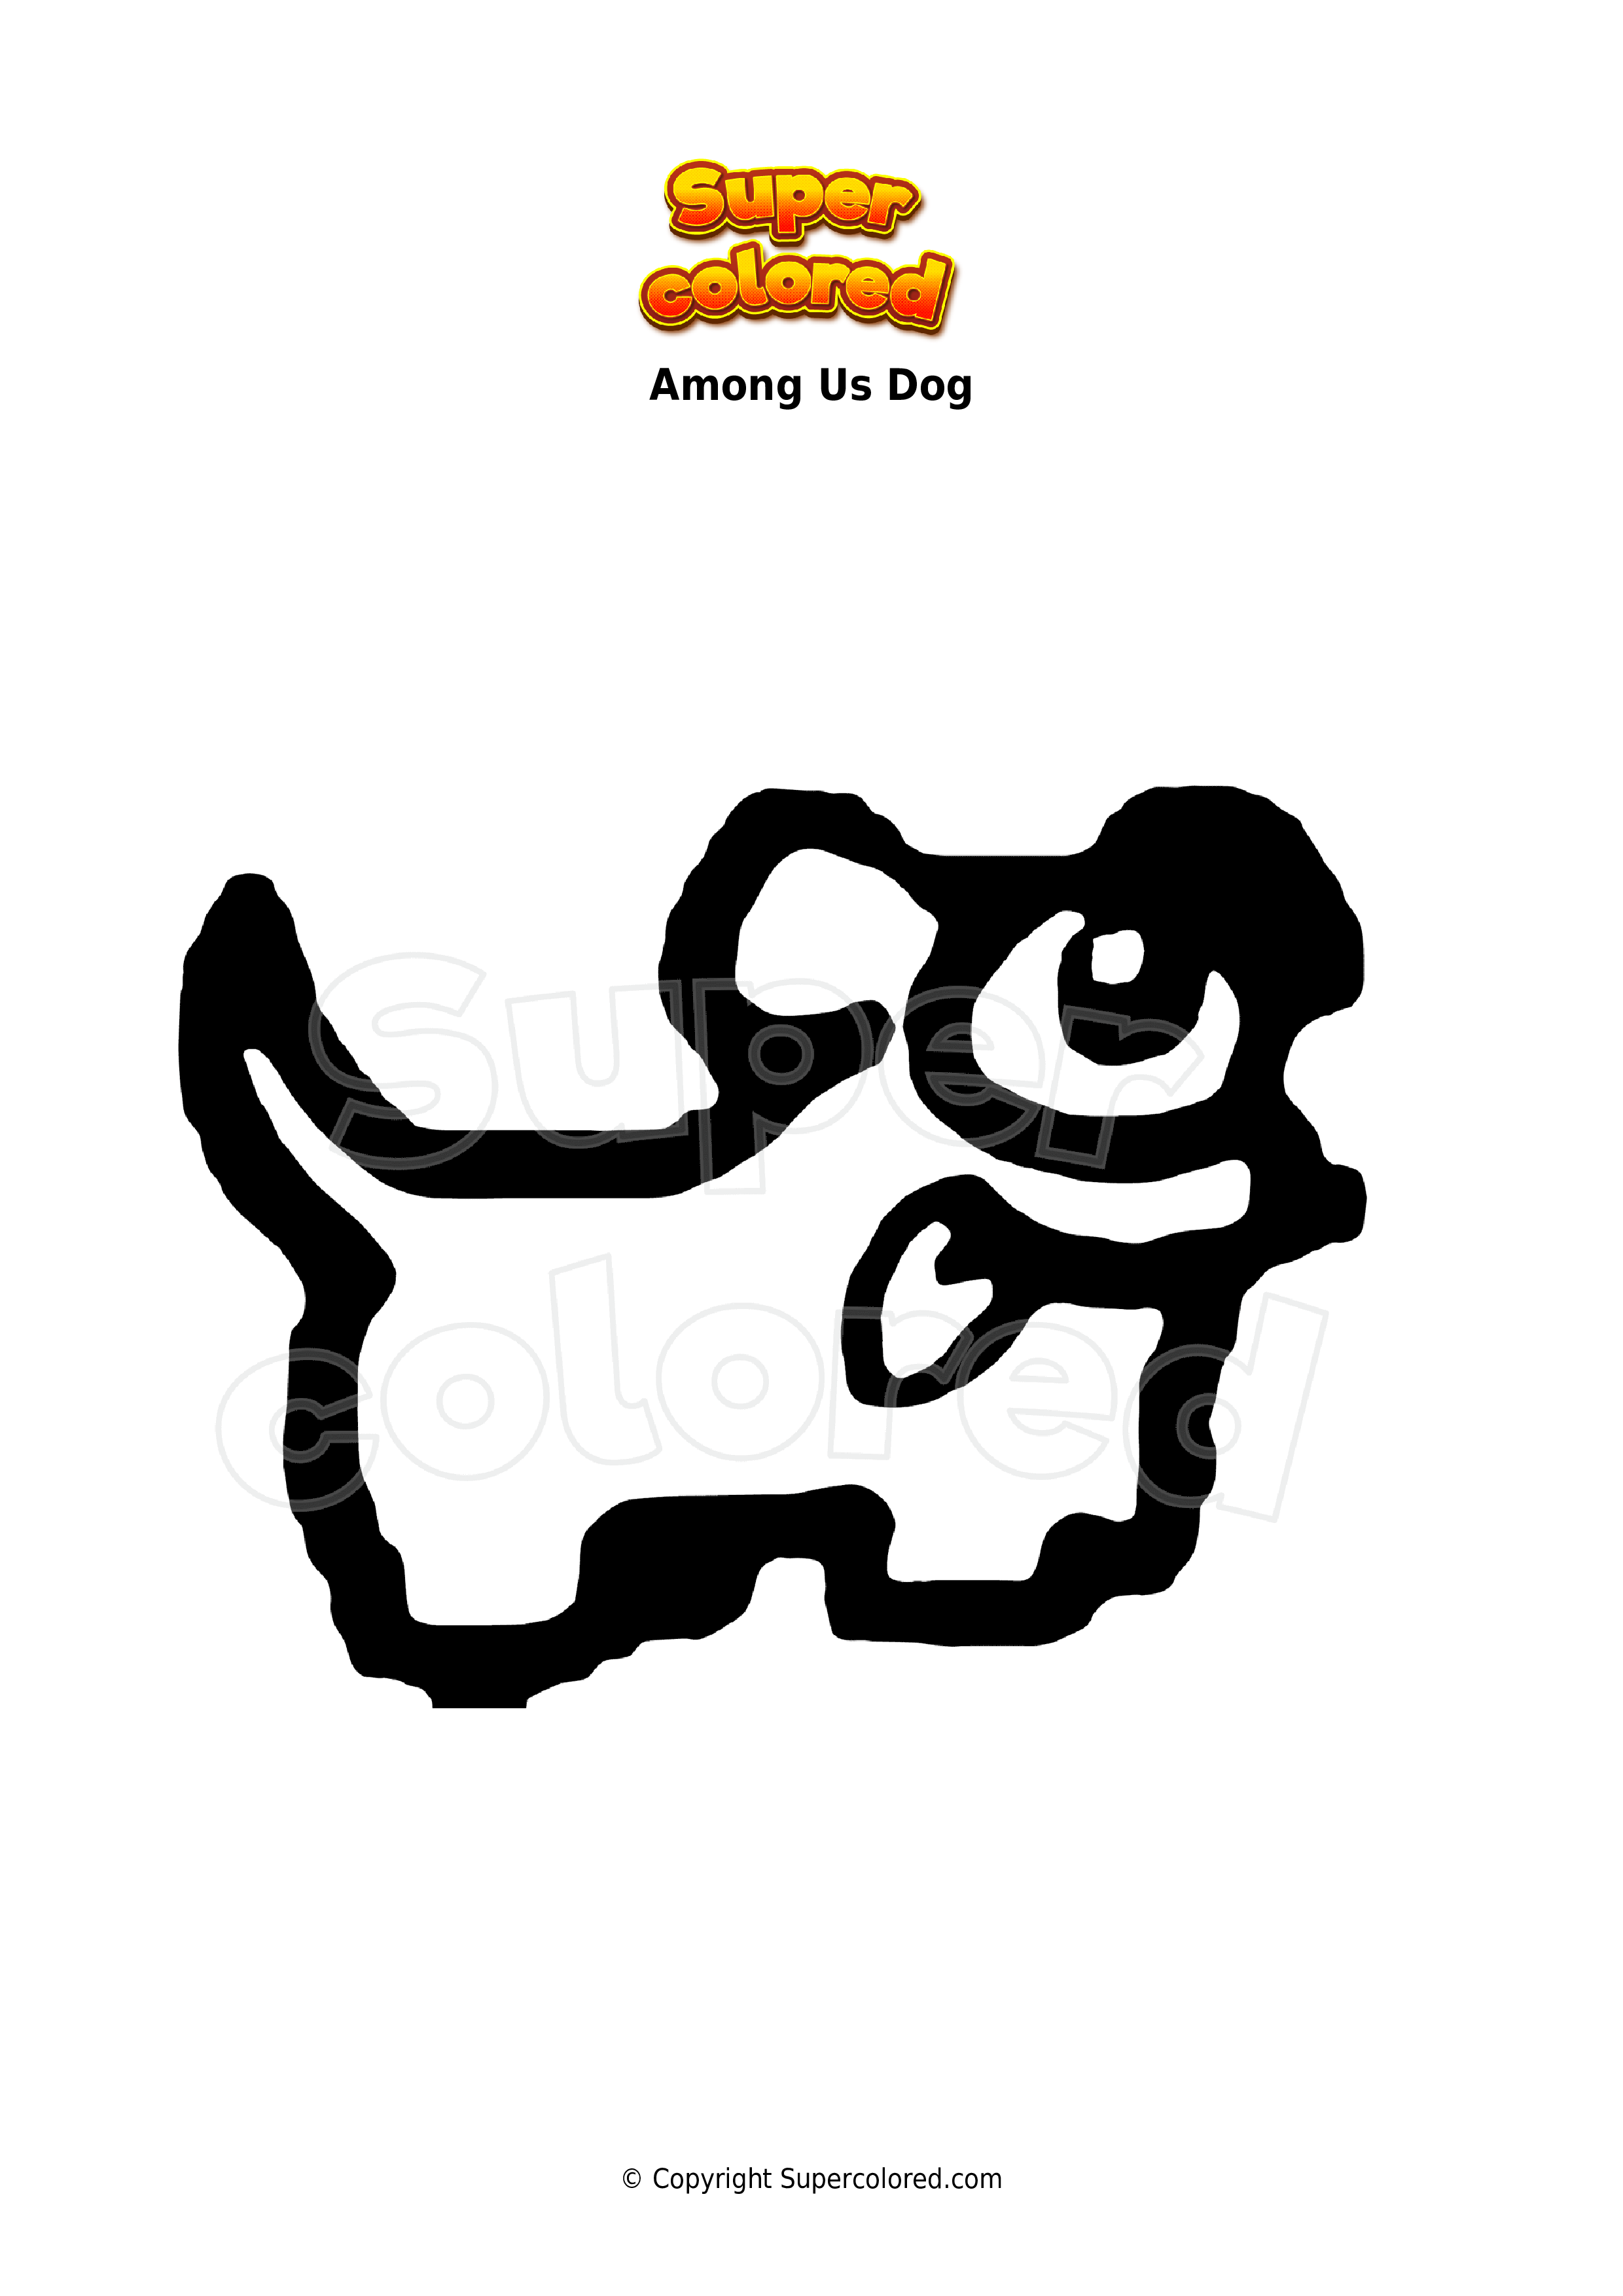 Coloring page Among Us Dog   Supercolored.com